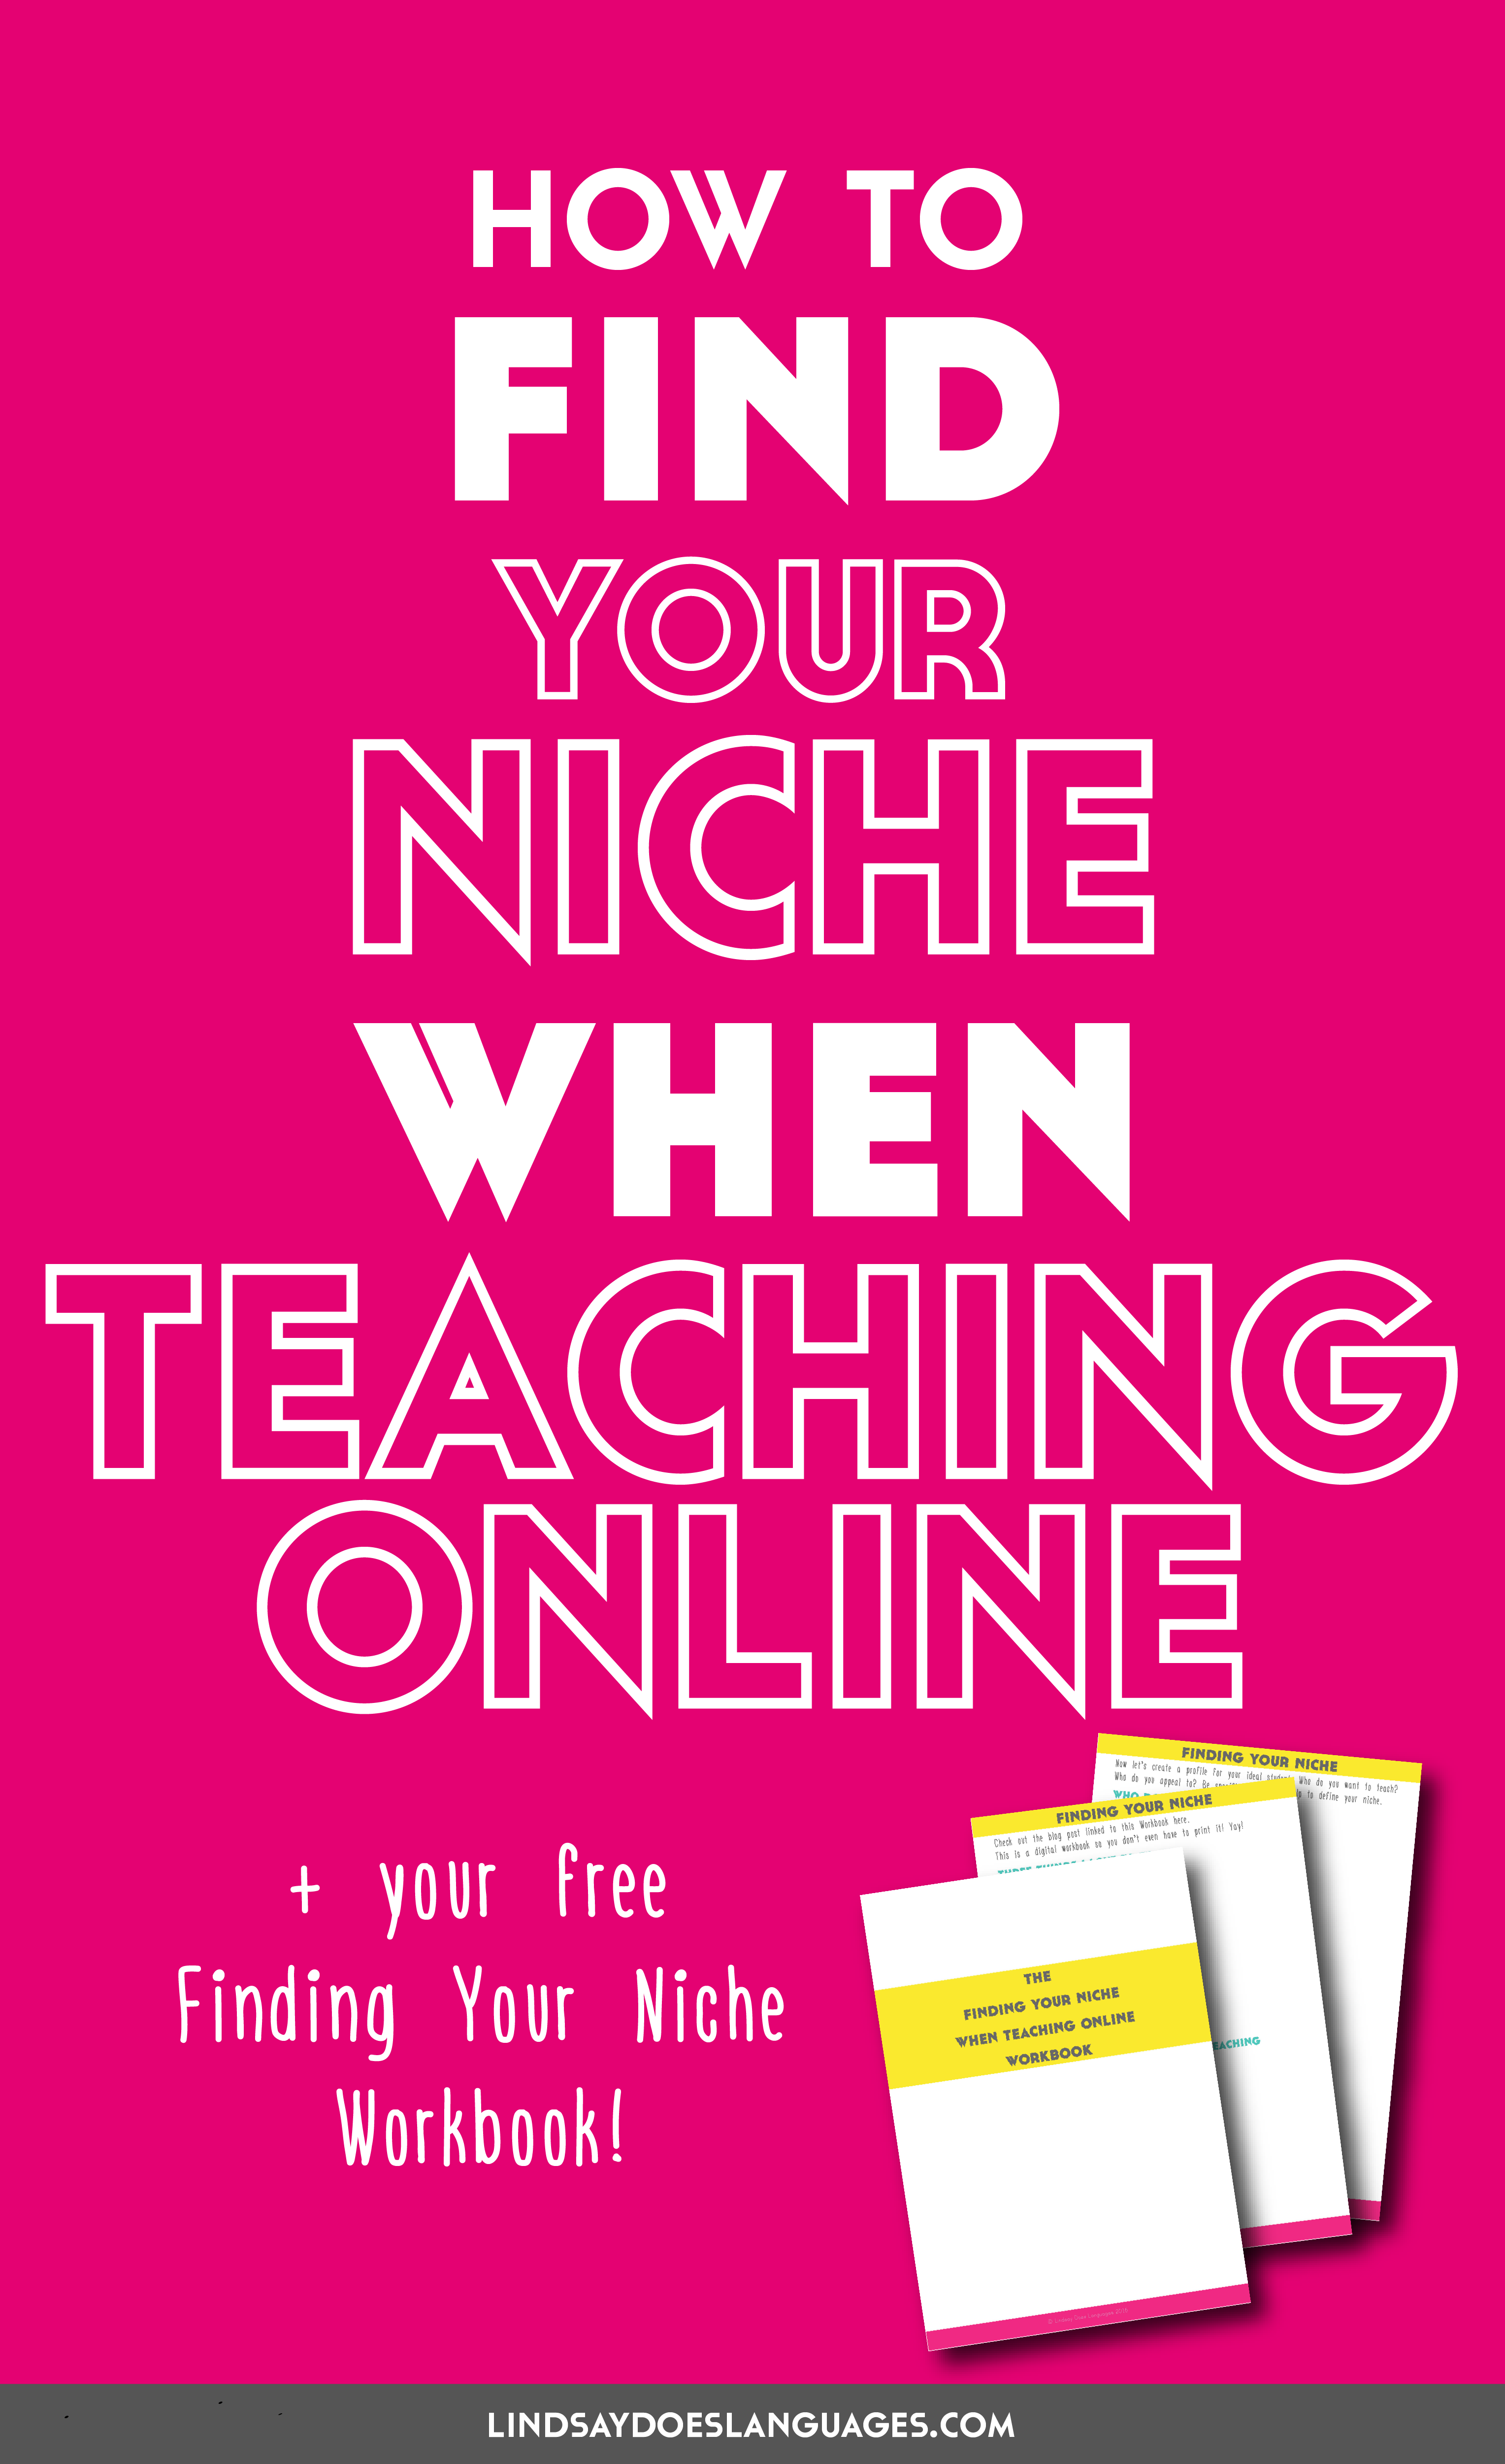 One of the most important things you can do for your online teaching business is find where you fit and who you're catering for. Click through to read about finding your niche for online teaching + get your free workbook to help you get there! >>